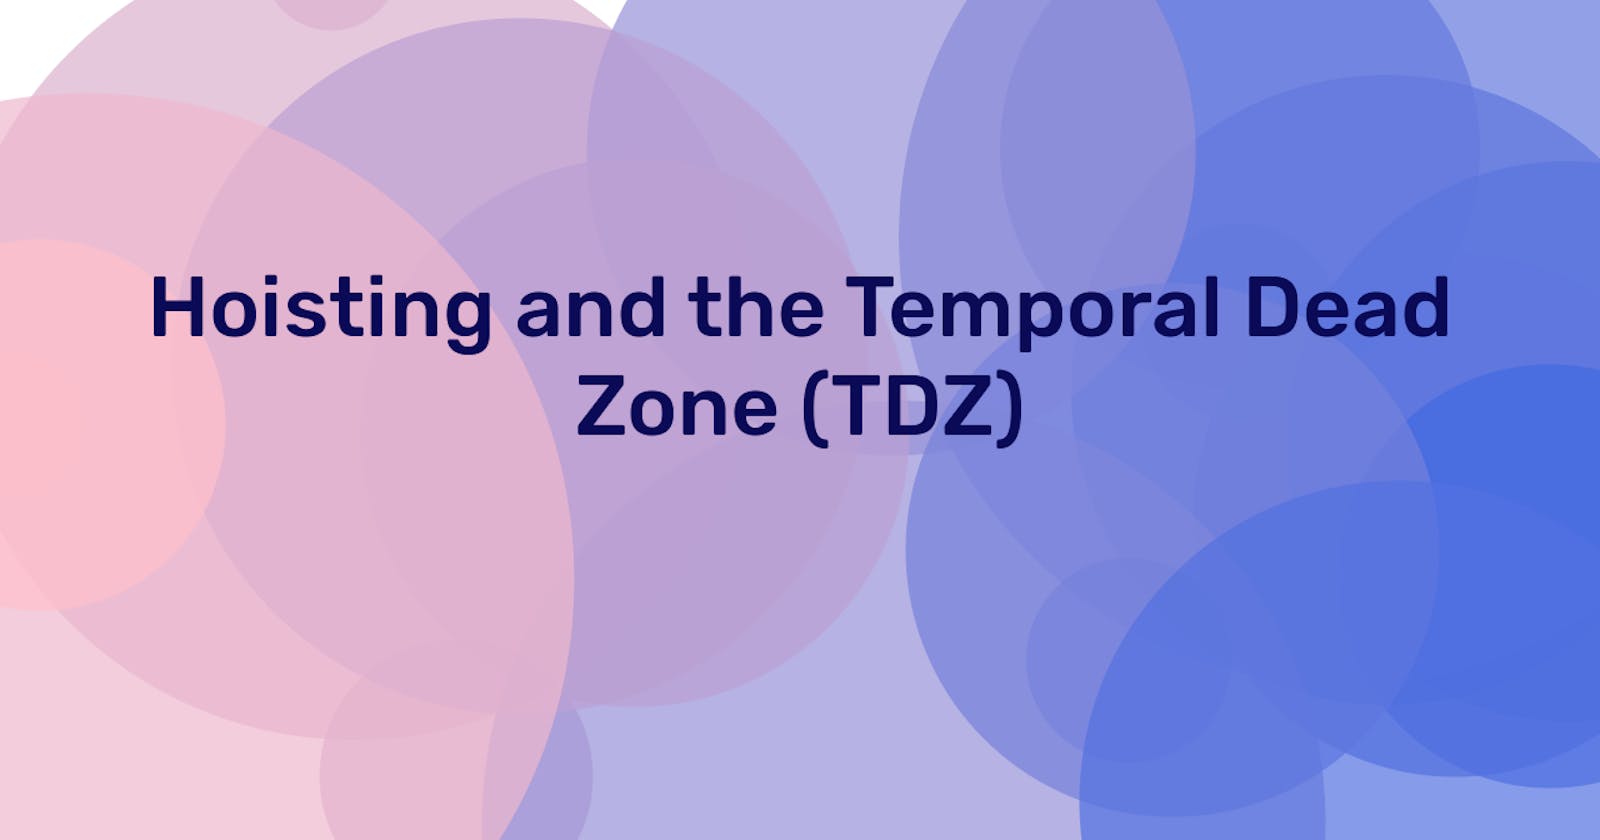 Hoisting and the Temporal Dead Zone (TDZ)